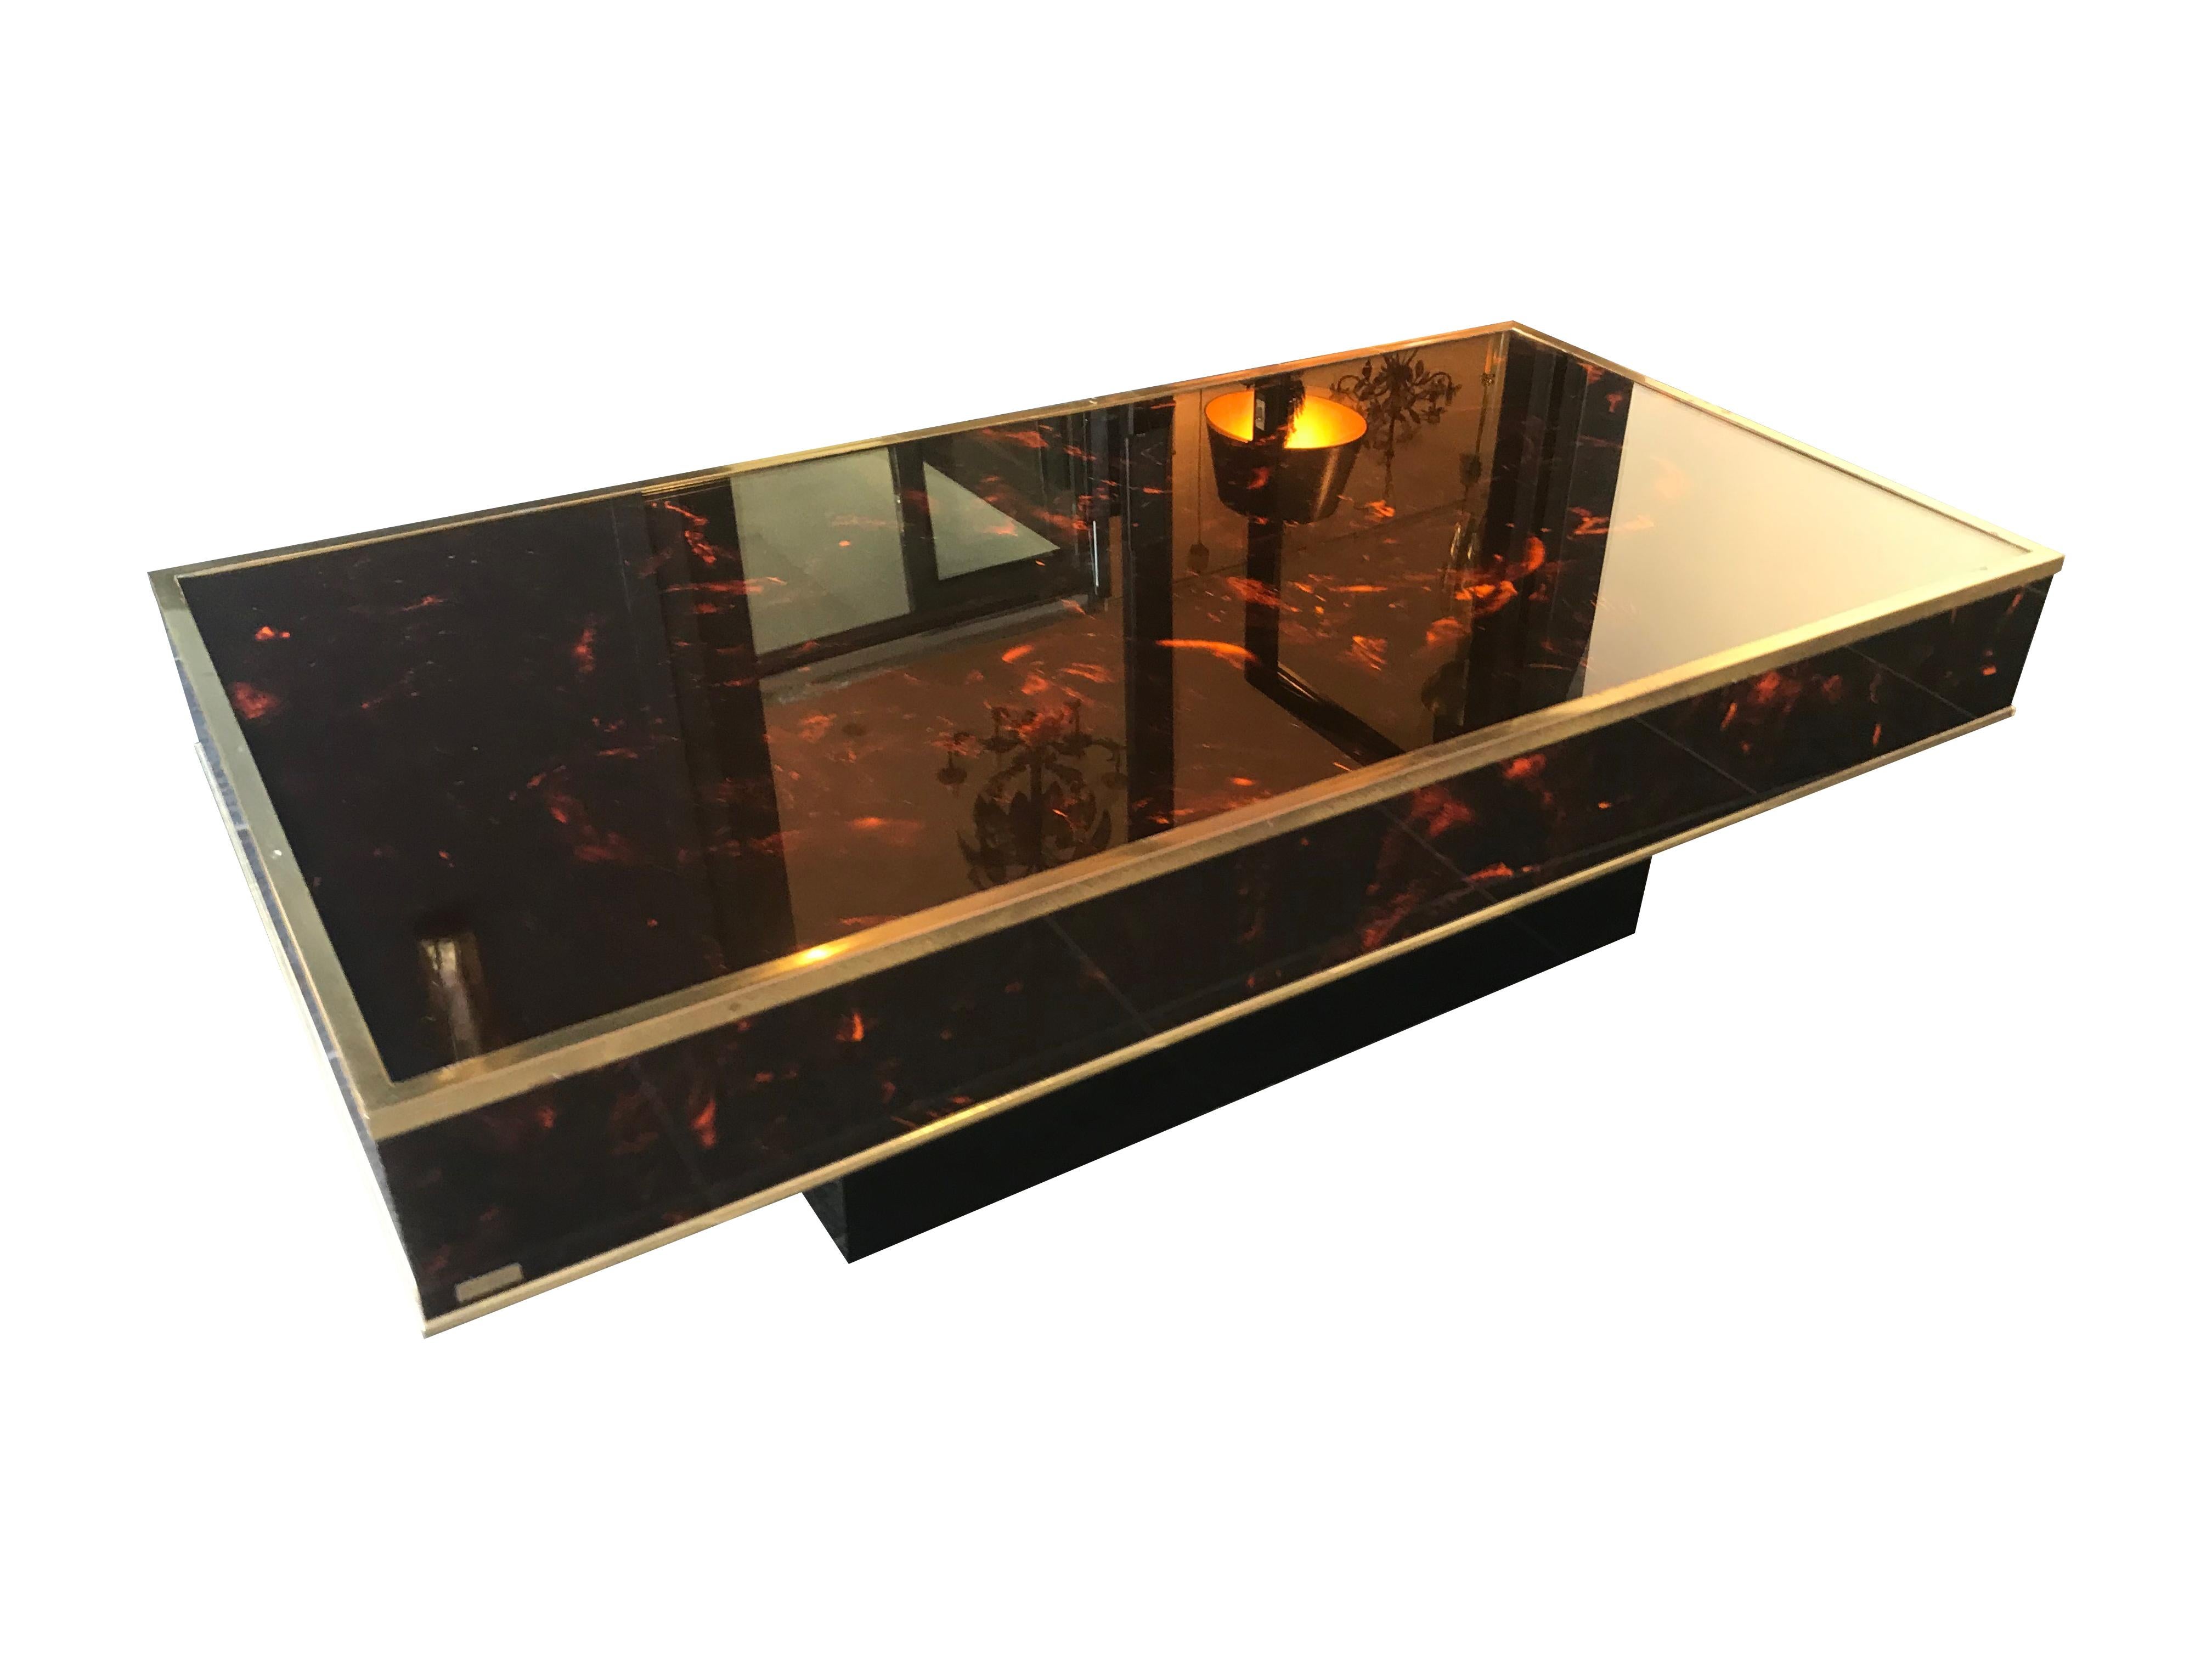 An Eric Maville faux tortoiseshell coffee table with clear glass top and gilt metal edging, mounted on a black laminated base. With brass plague stamped 